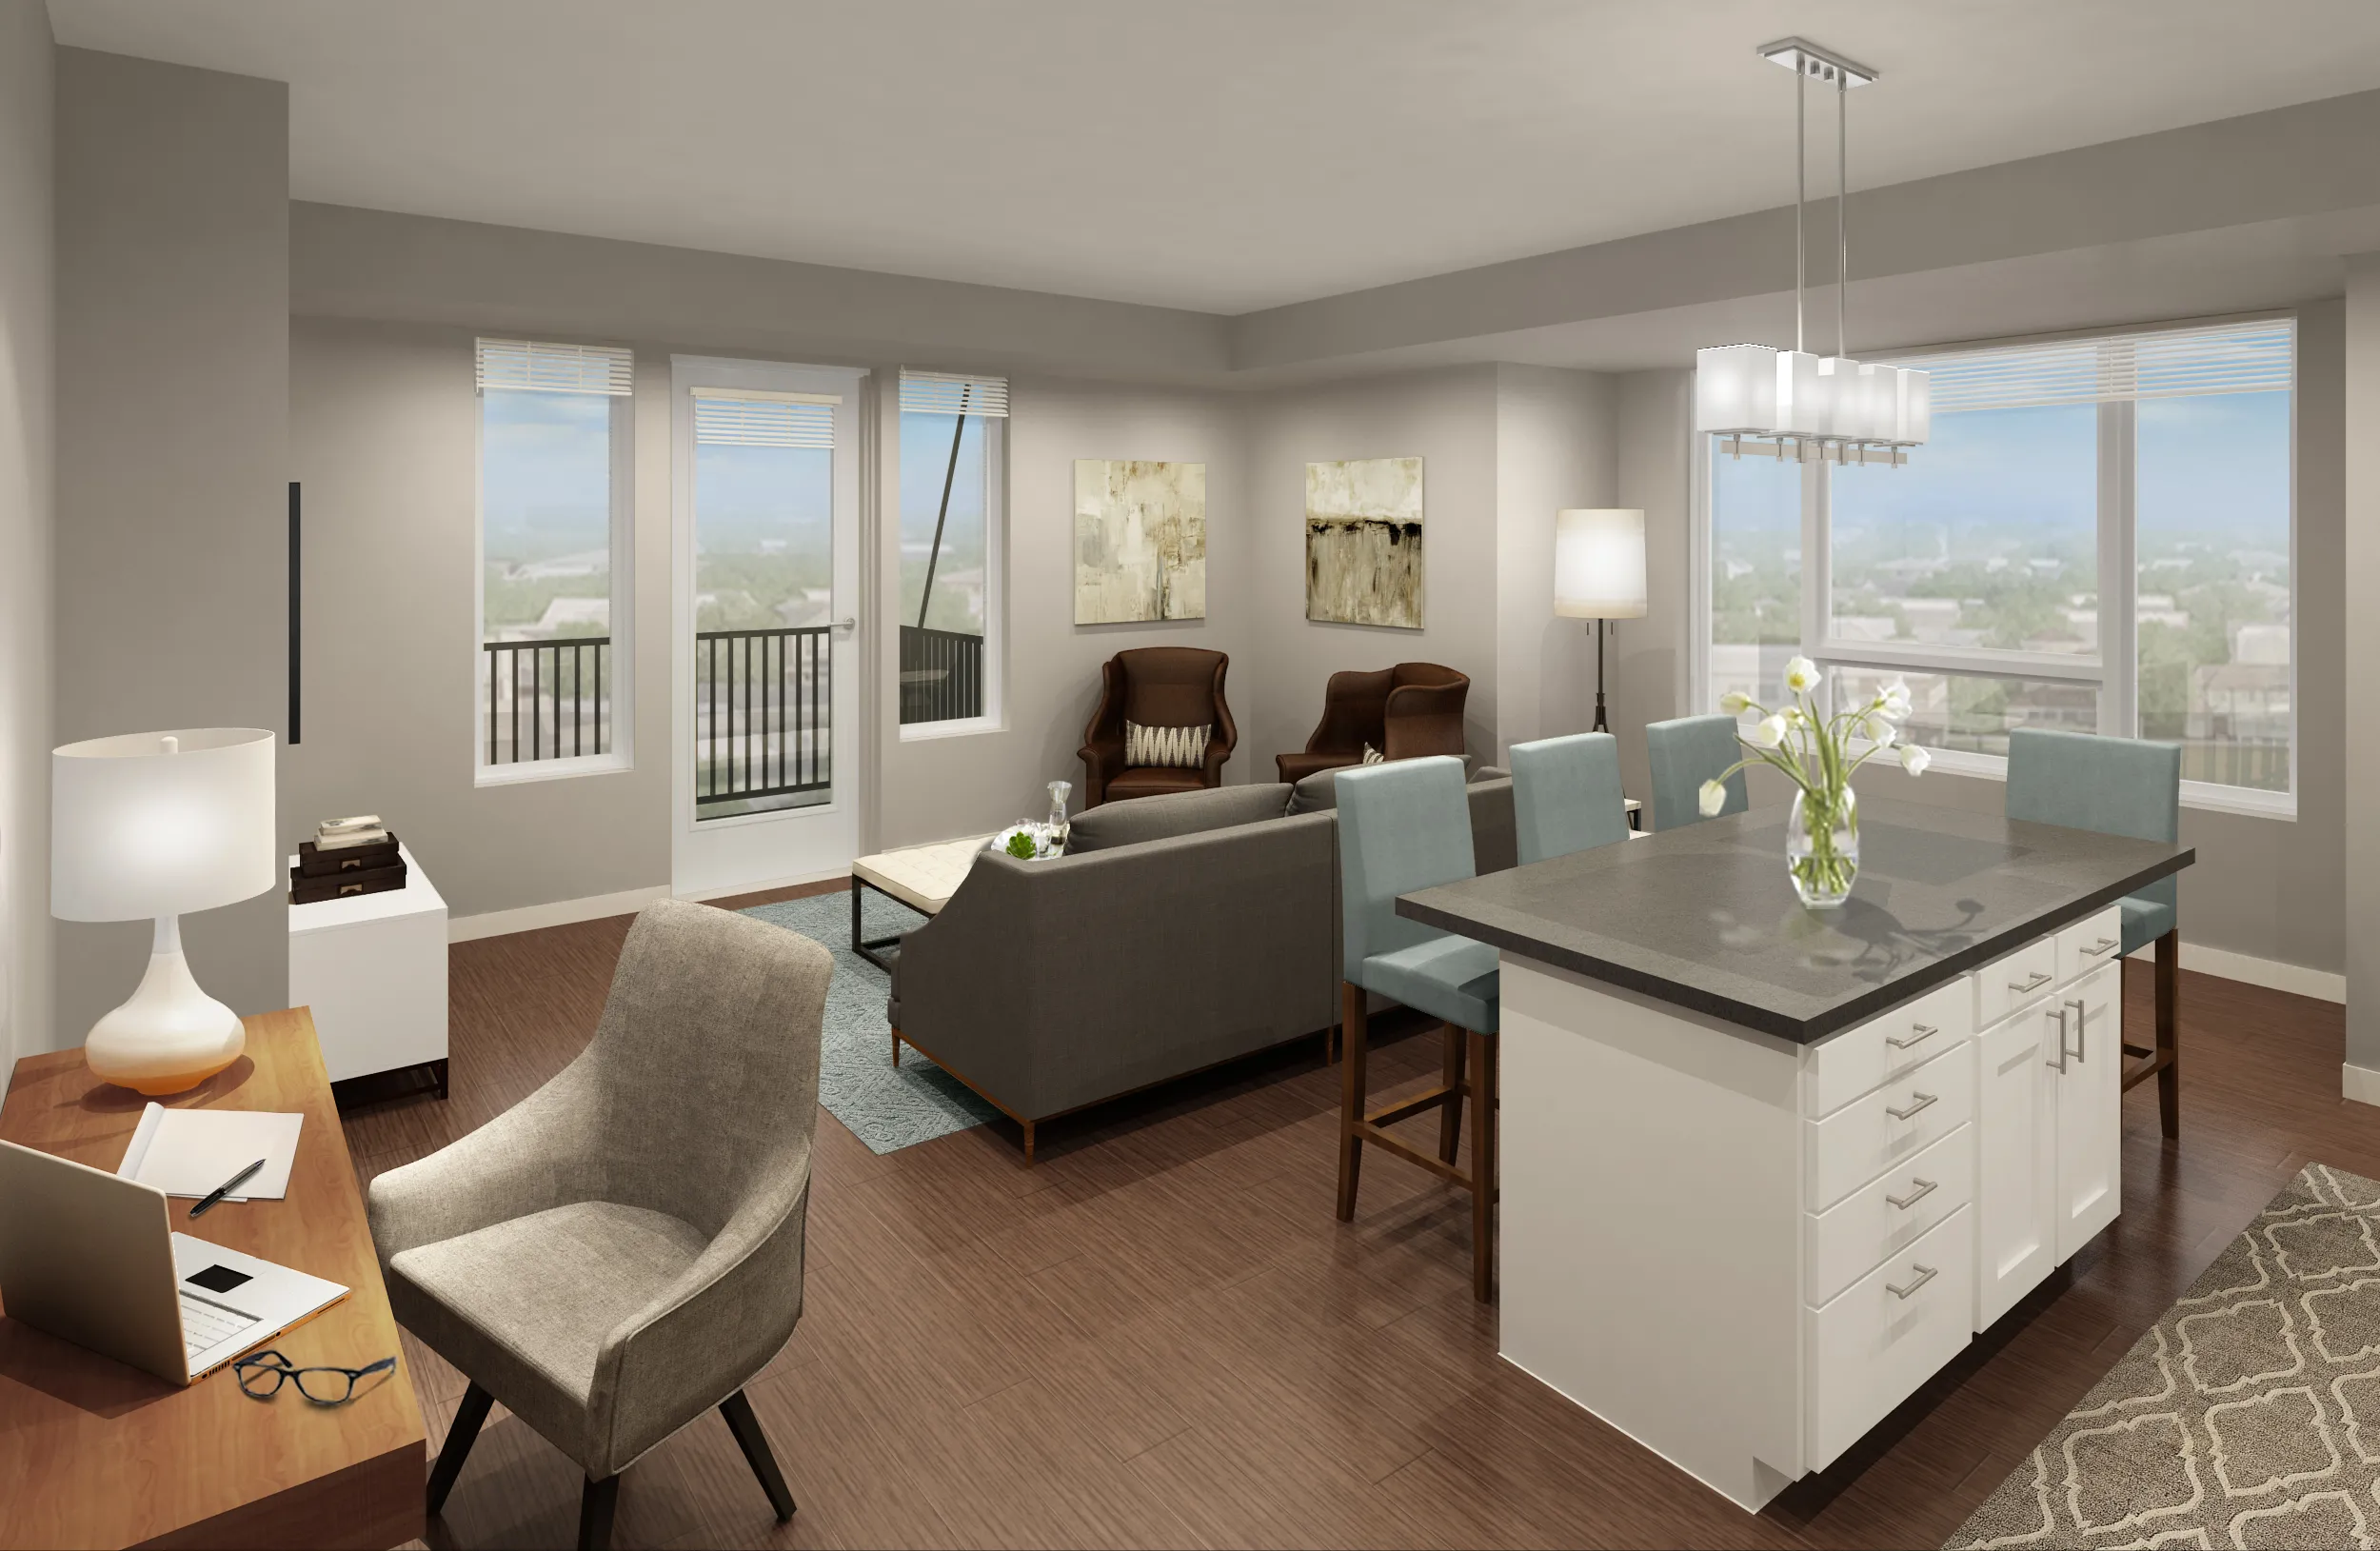 furnished model kitchen and living room at Park 205 Apartments